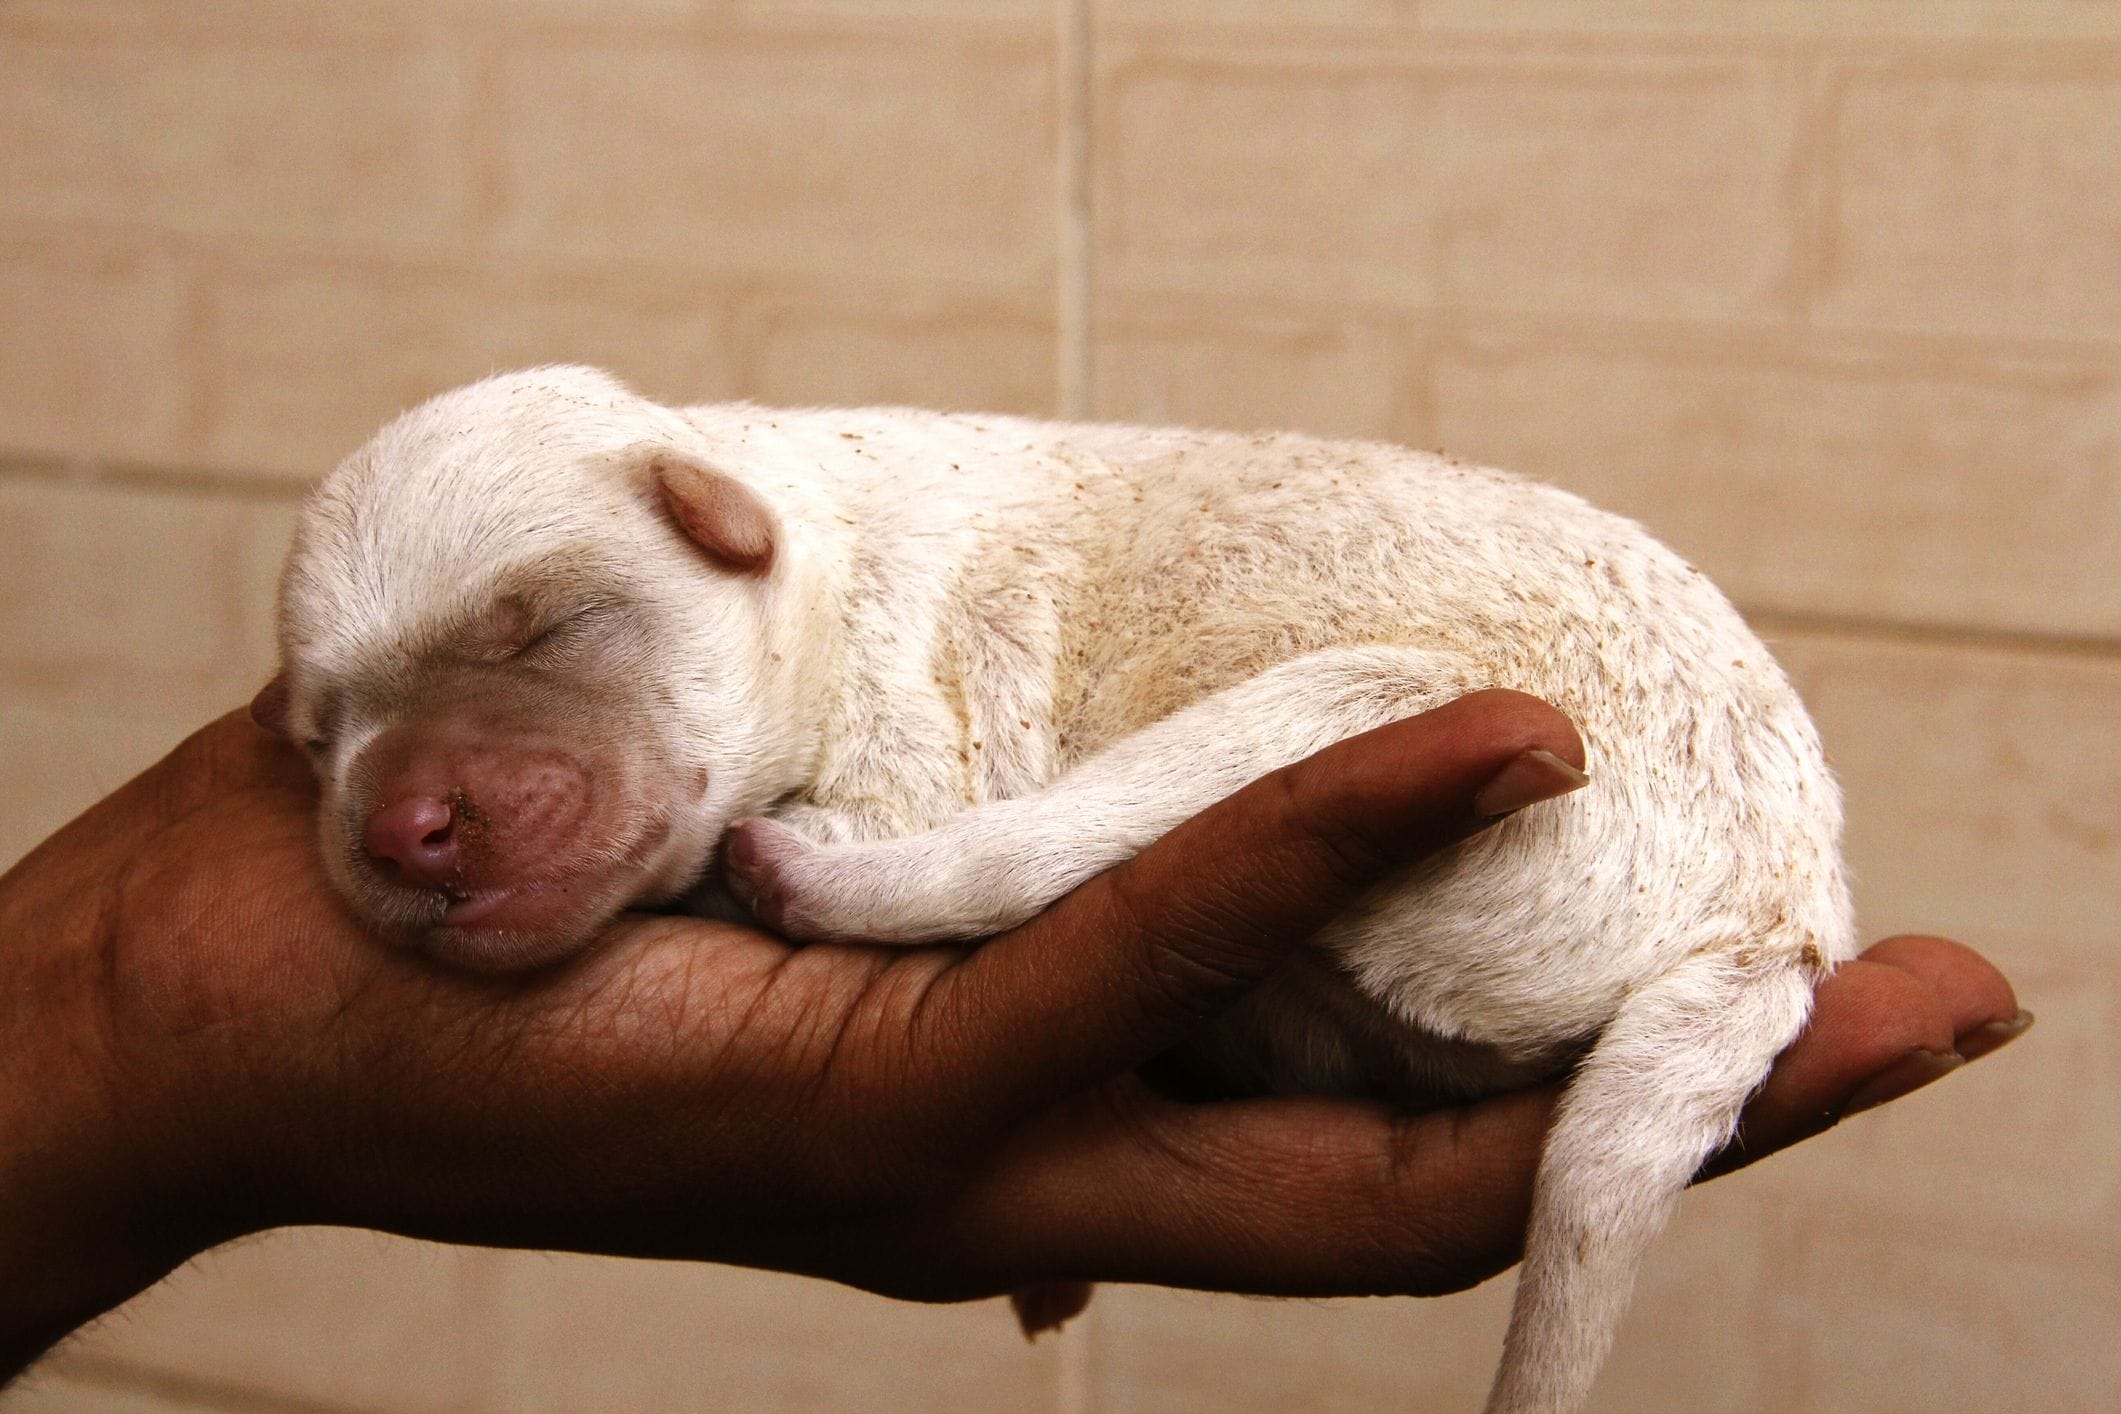 Puppy stages: A week-by-week guide to caring for a newborn puppy